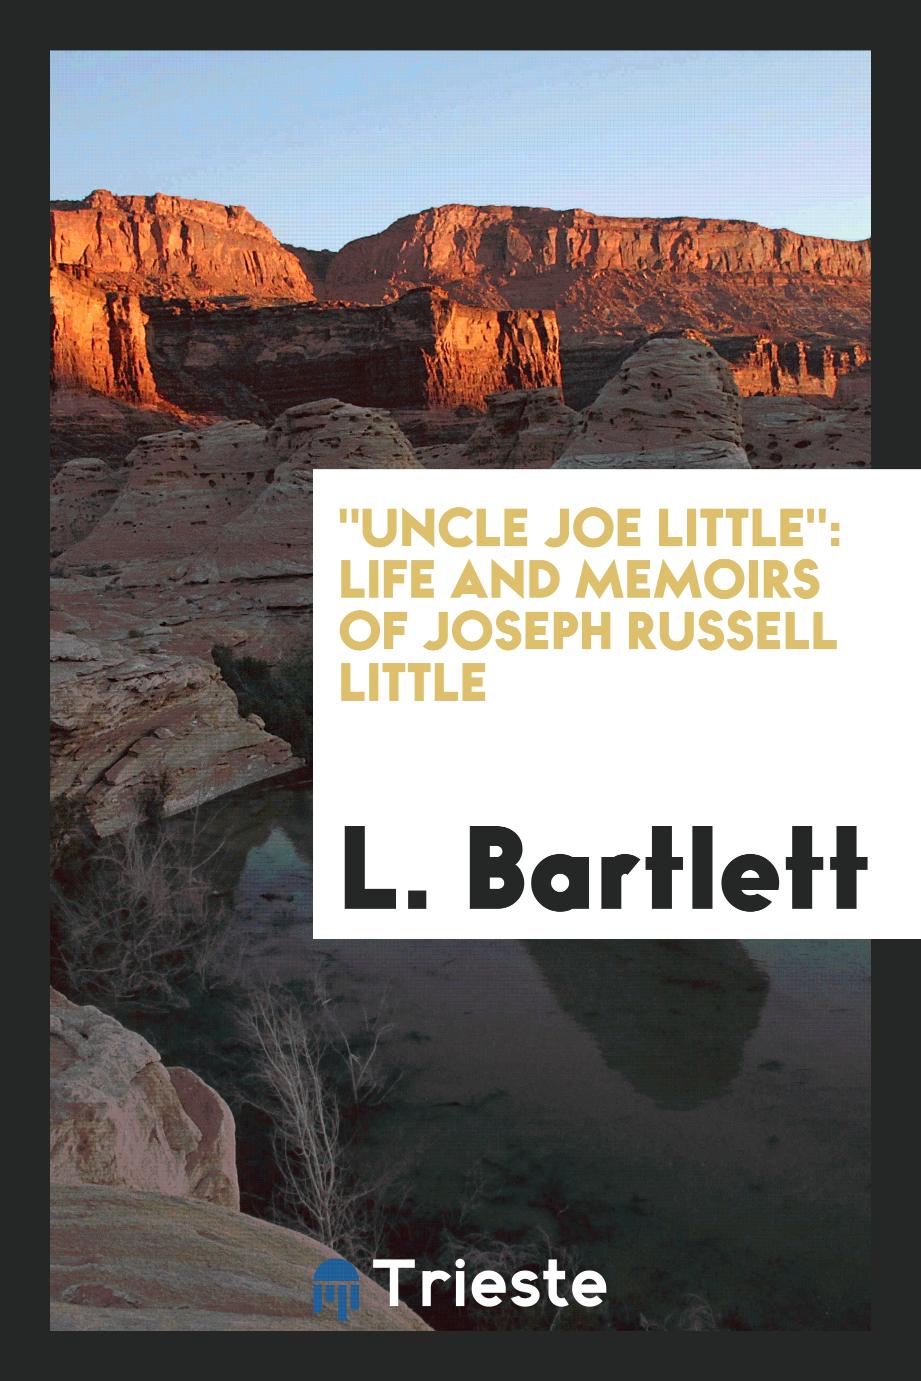 "Uncle Joe Little": life and memoirs of Joseph Russell Little